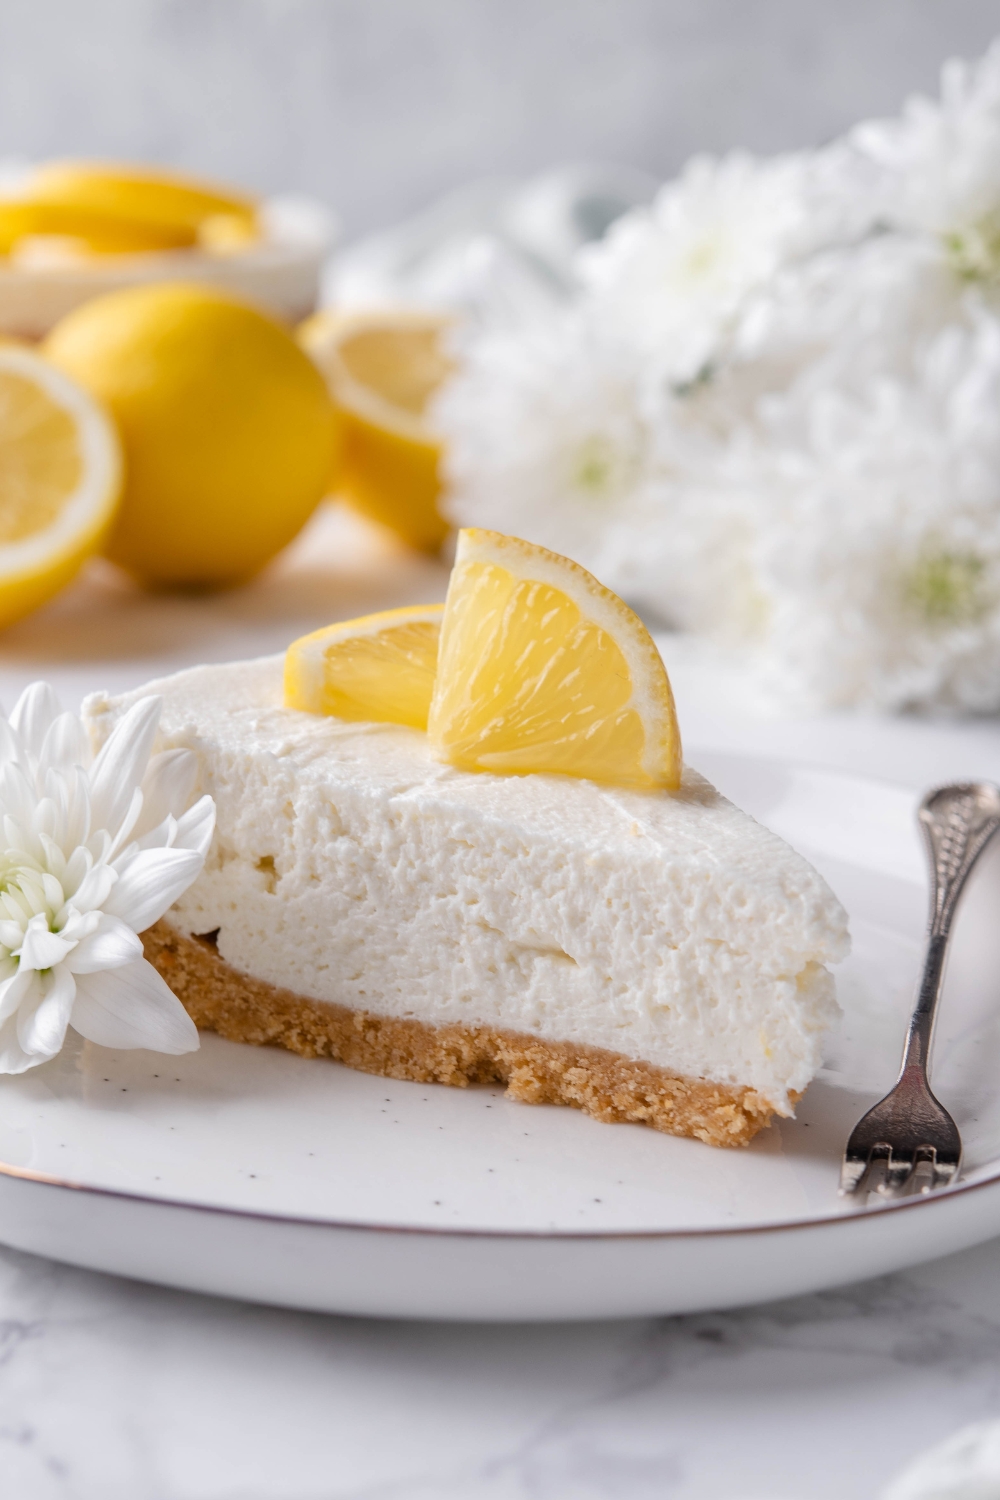 A plate with a slice of cheesecake topped with lemon wedges and garnished with a flower. The fork is sitting next to the slice.